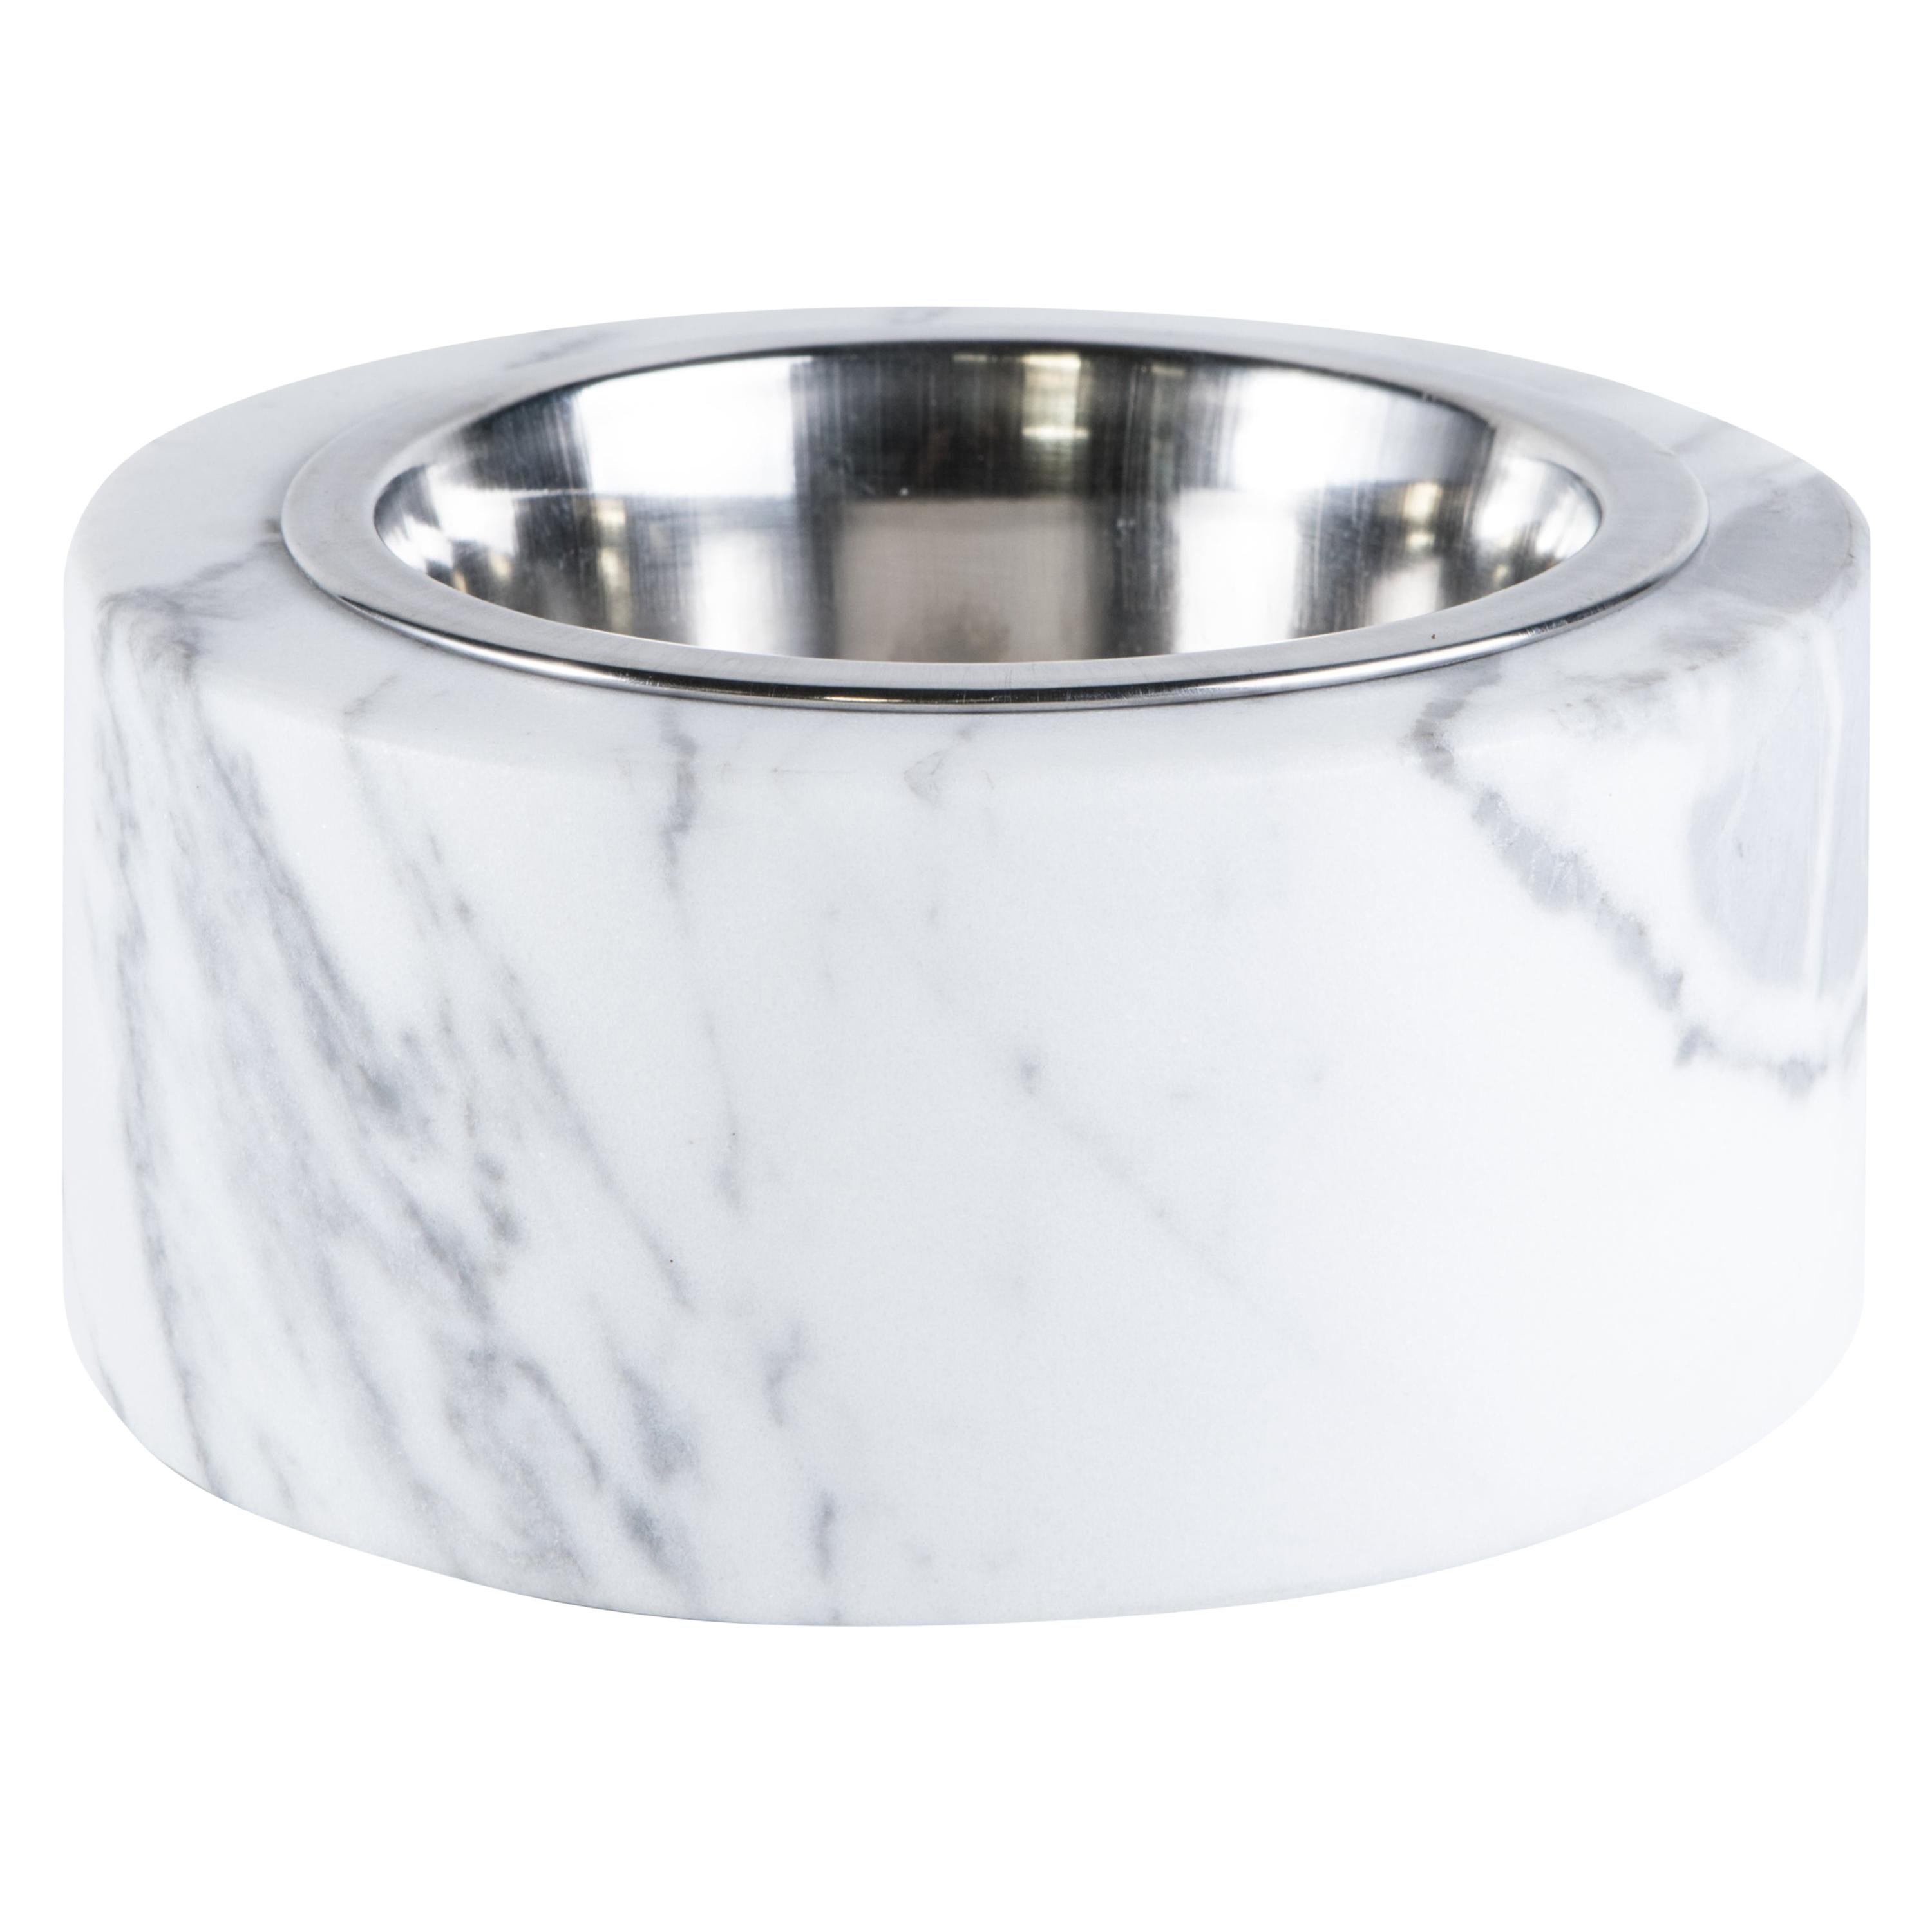 Handmade Rounded White Carrara Marble Cats or Dogs Bowl with Removable Steel For Sale